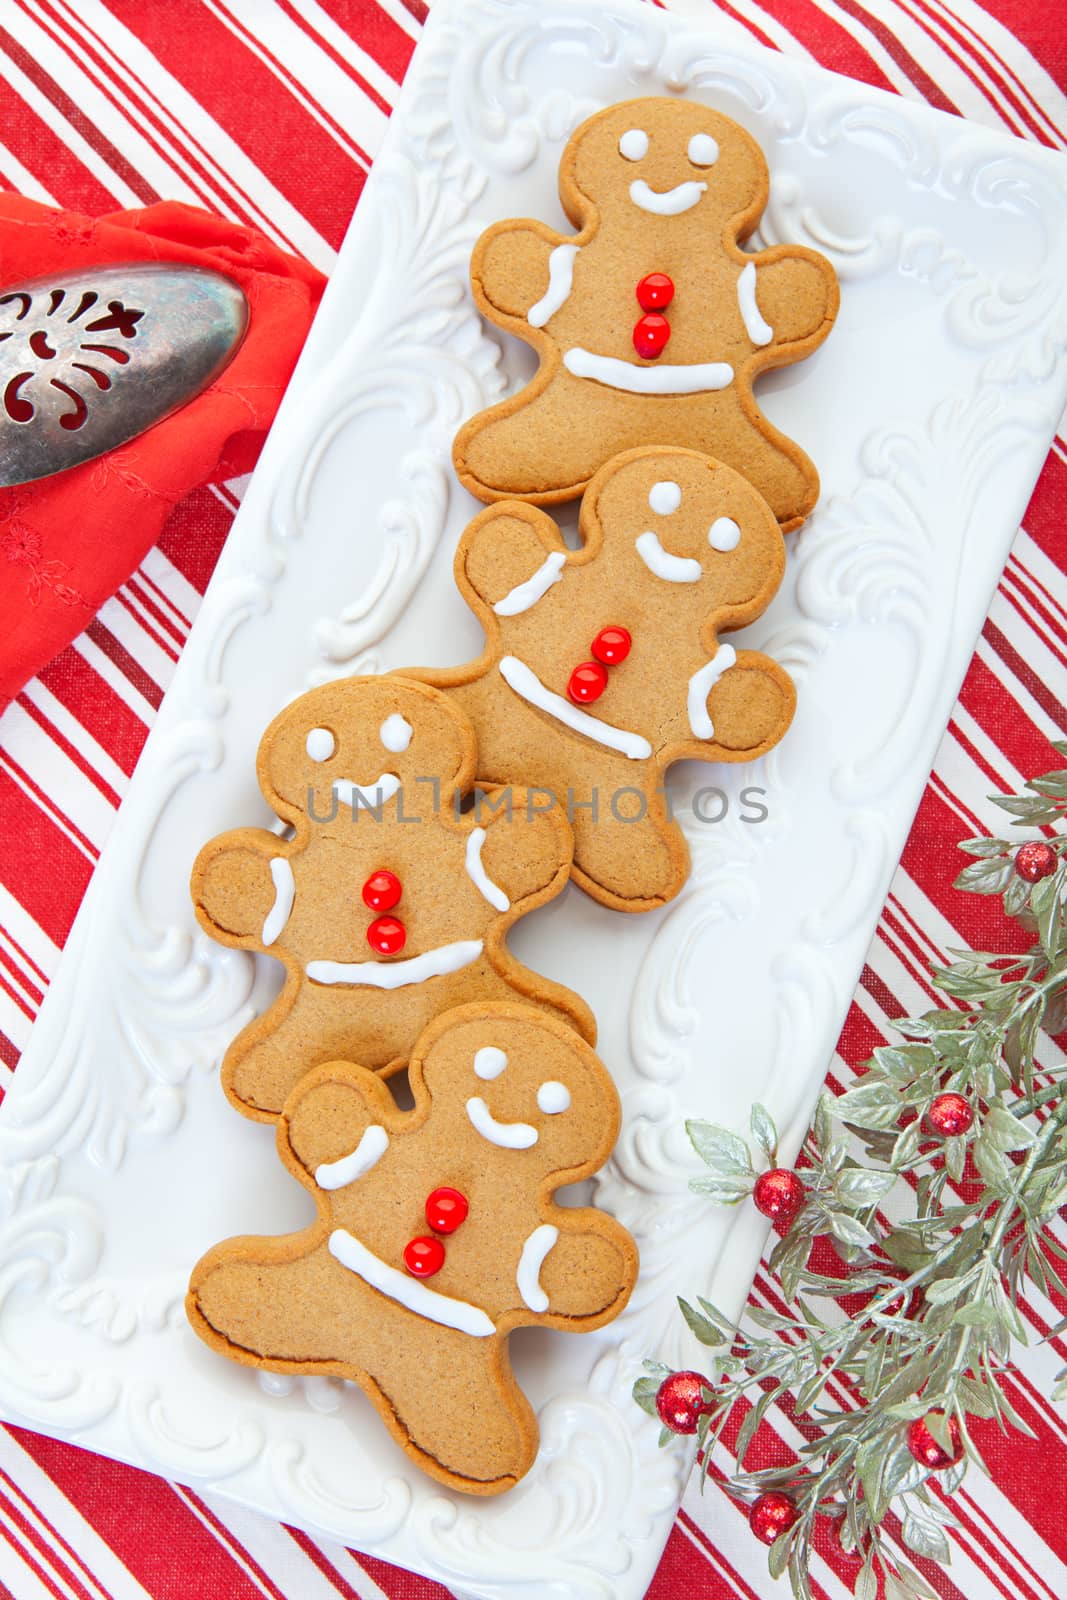 Gingerbread men served on an embossed tray on a candy cane striped tablecloth.